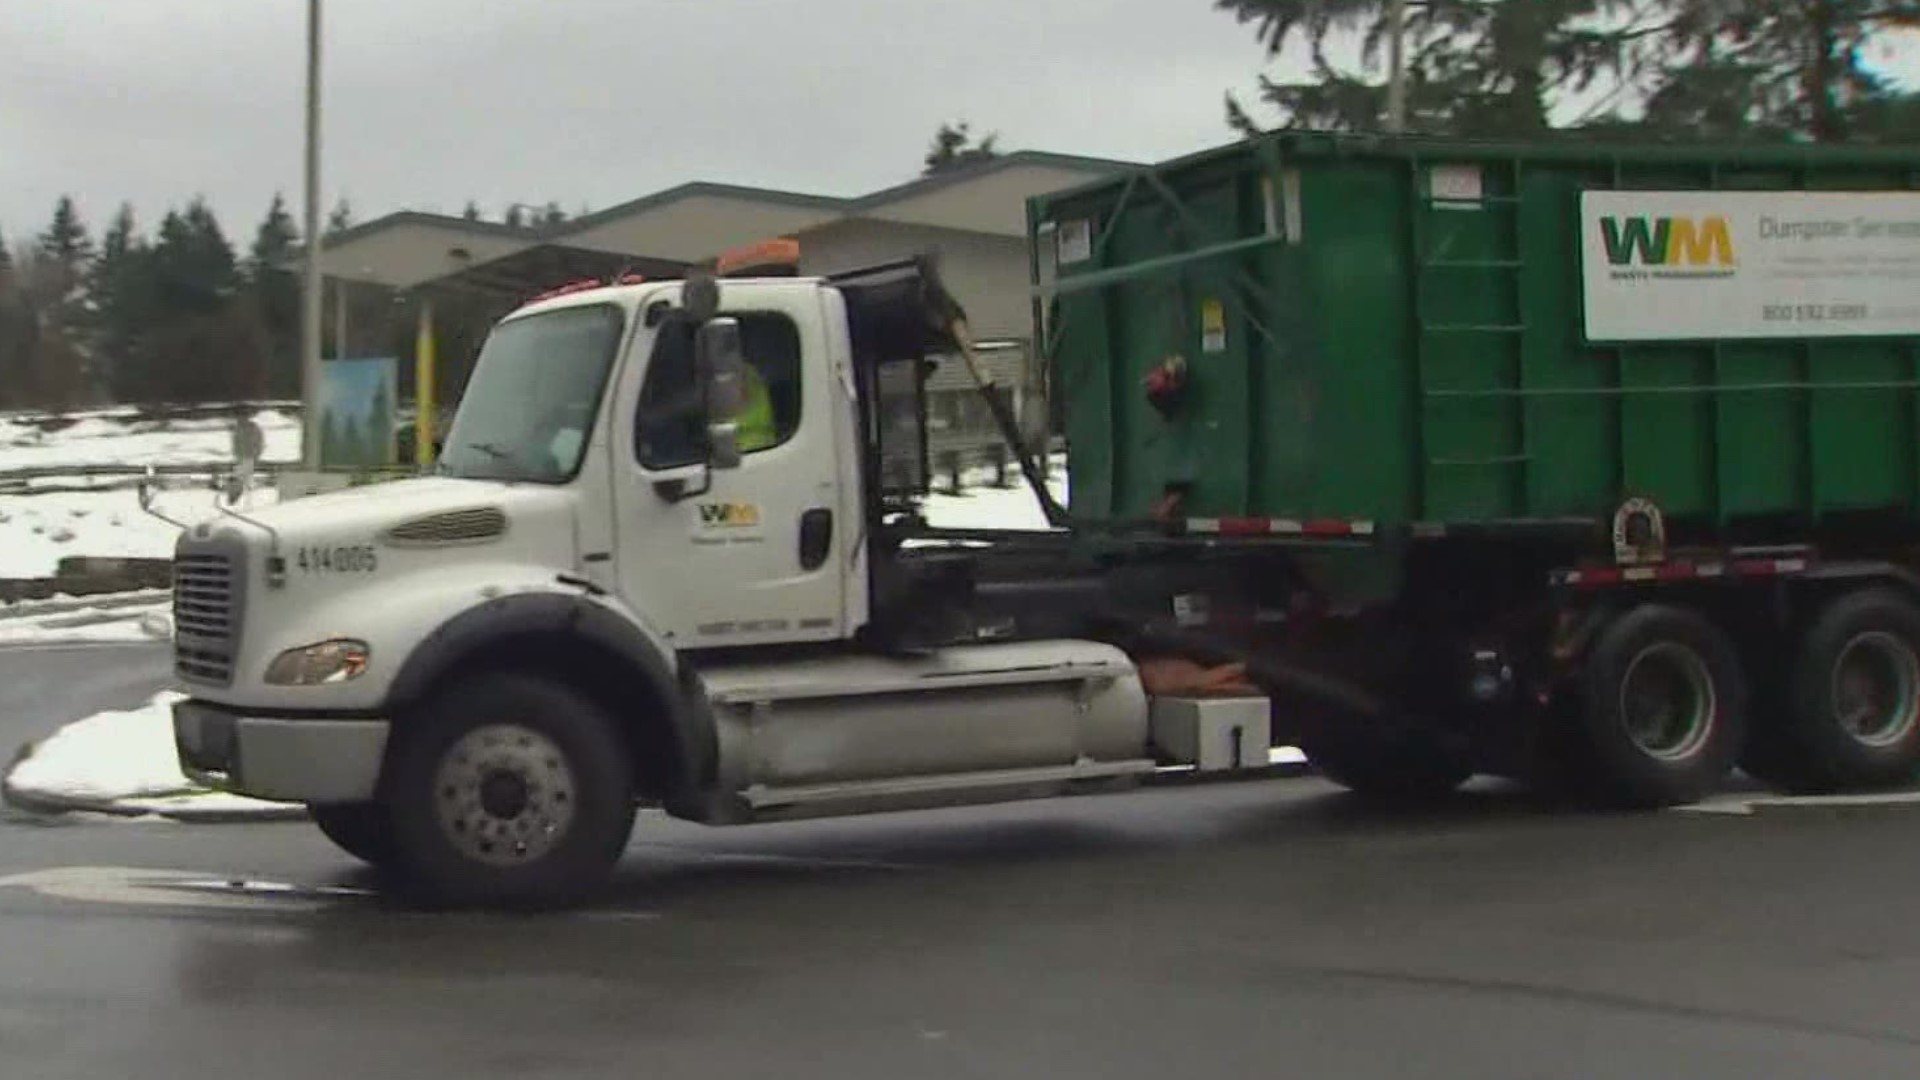 A new potential location for a recycling and transfer station in Kirkland is being met with resistance by locals. Noise and odor are the main concerns.